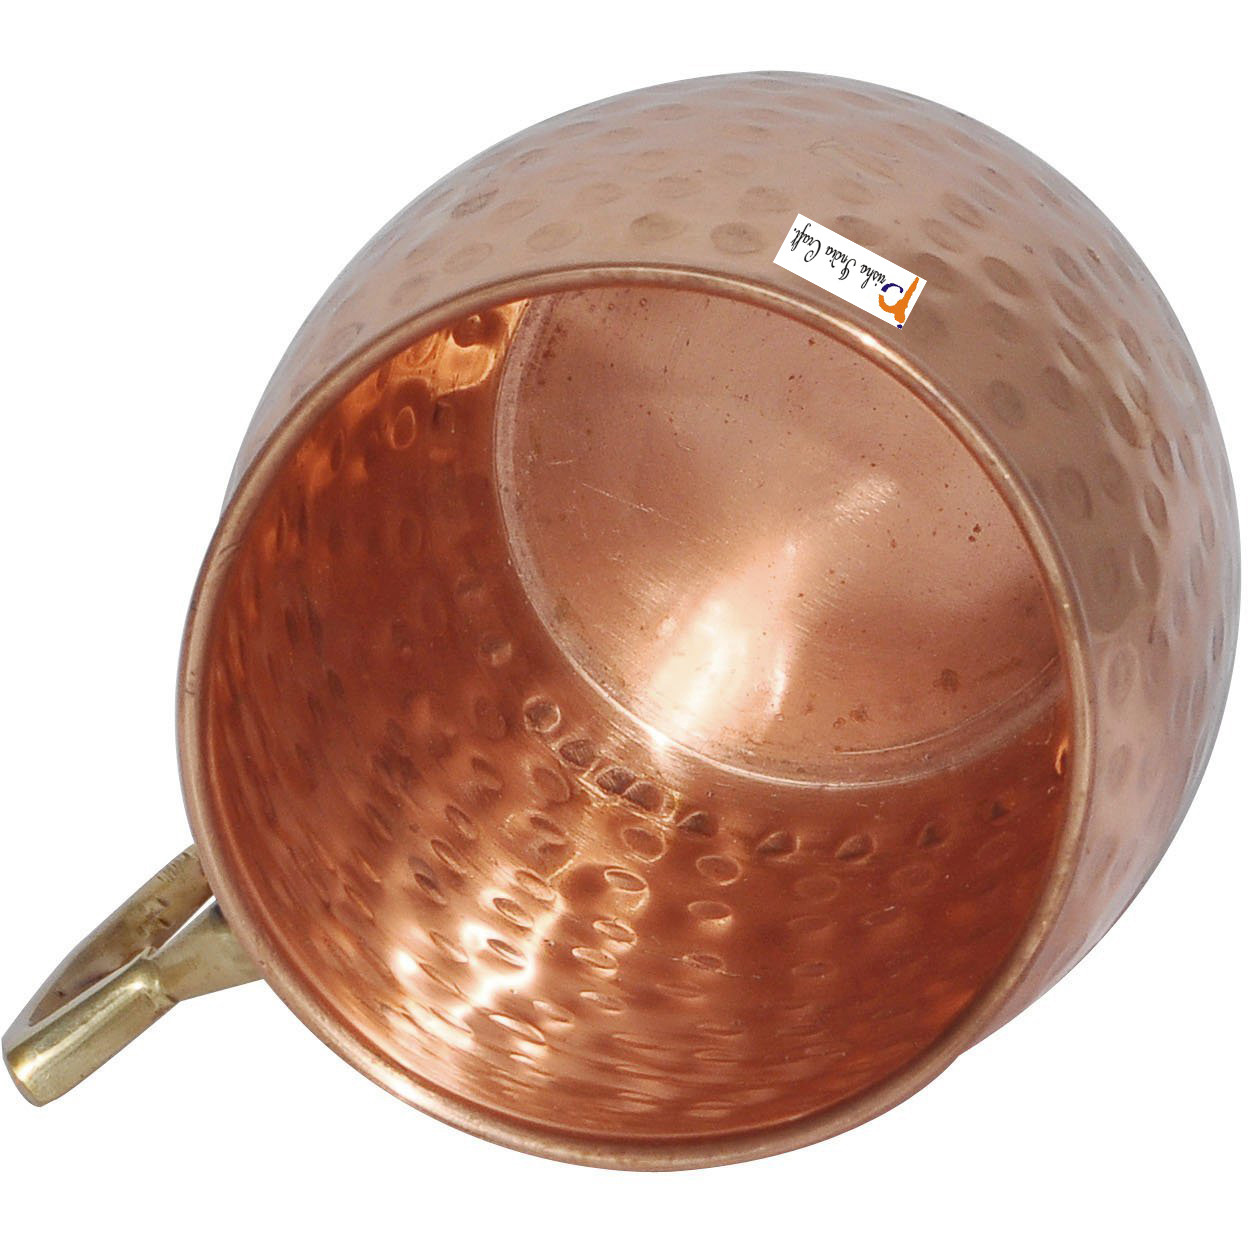 Set of 10 - Prisha India Craft B. Moscow Mule Solid Copper Mug 550 ML / 18 oz - 100% Pure Copper Hammered Best Quality Lacquered Finish, Cocktail Cup, Copper Mugs, Cocktail Mugs with No Inner Linings